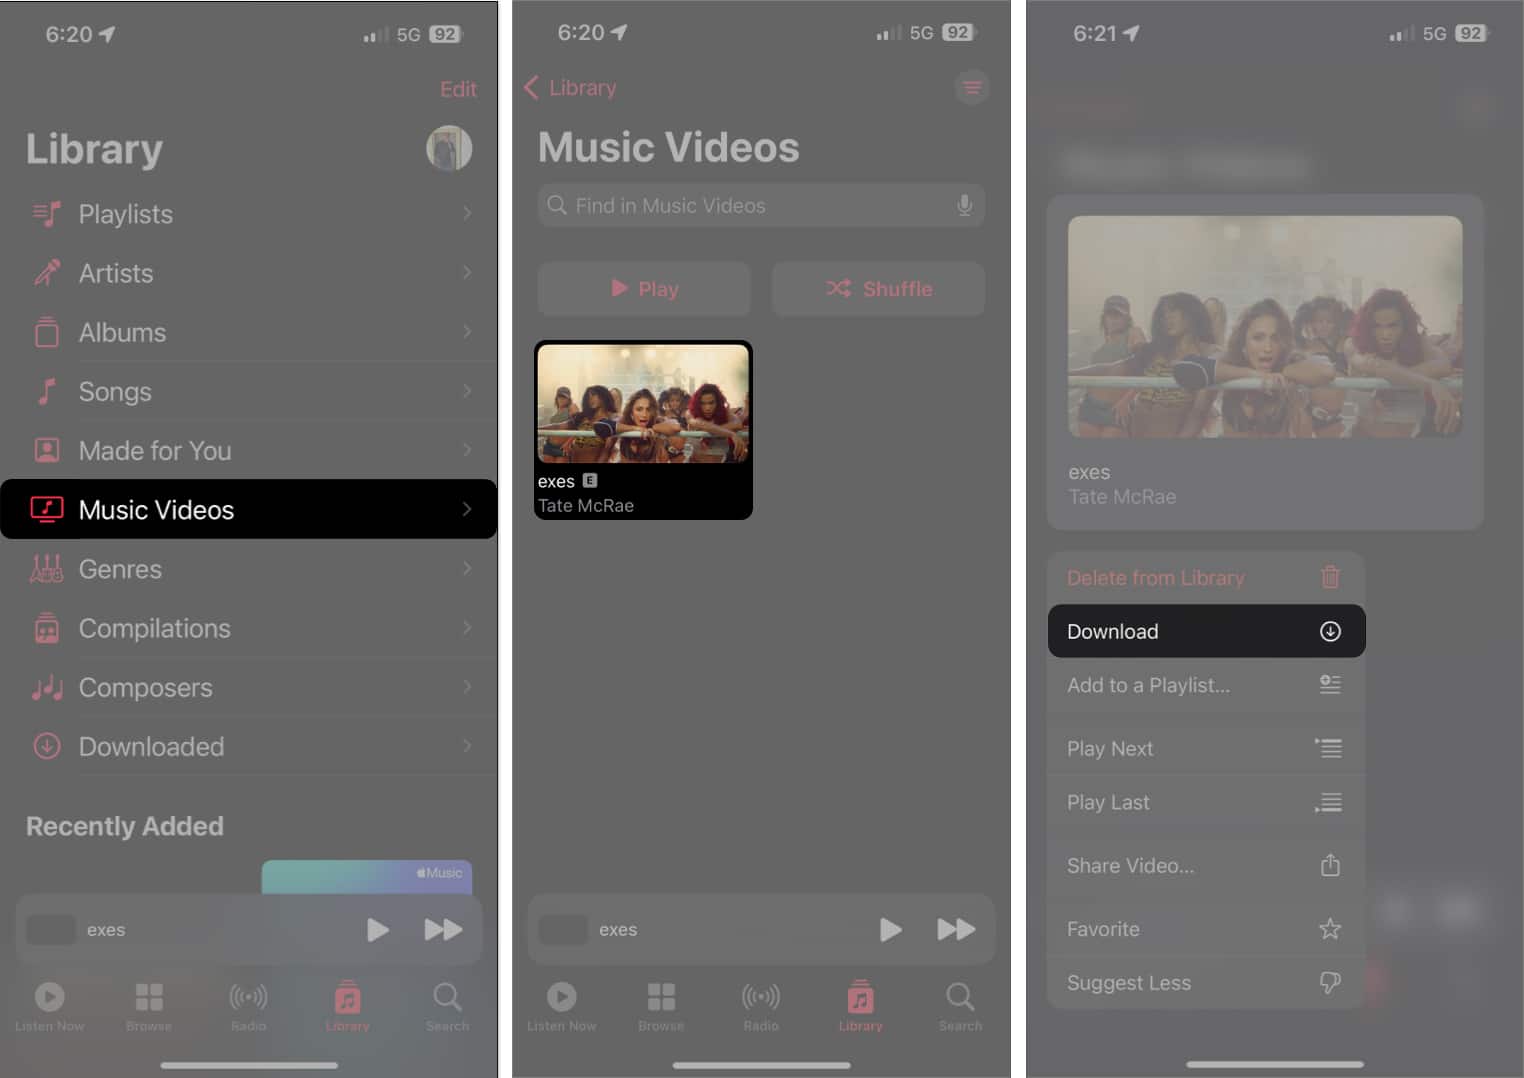 Download music videos in Apple Music on iPhone